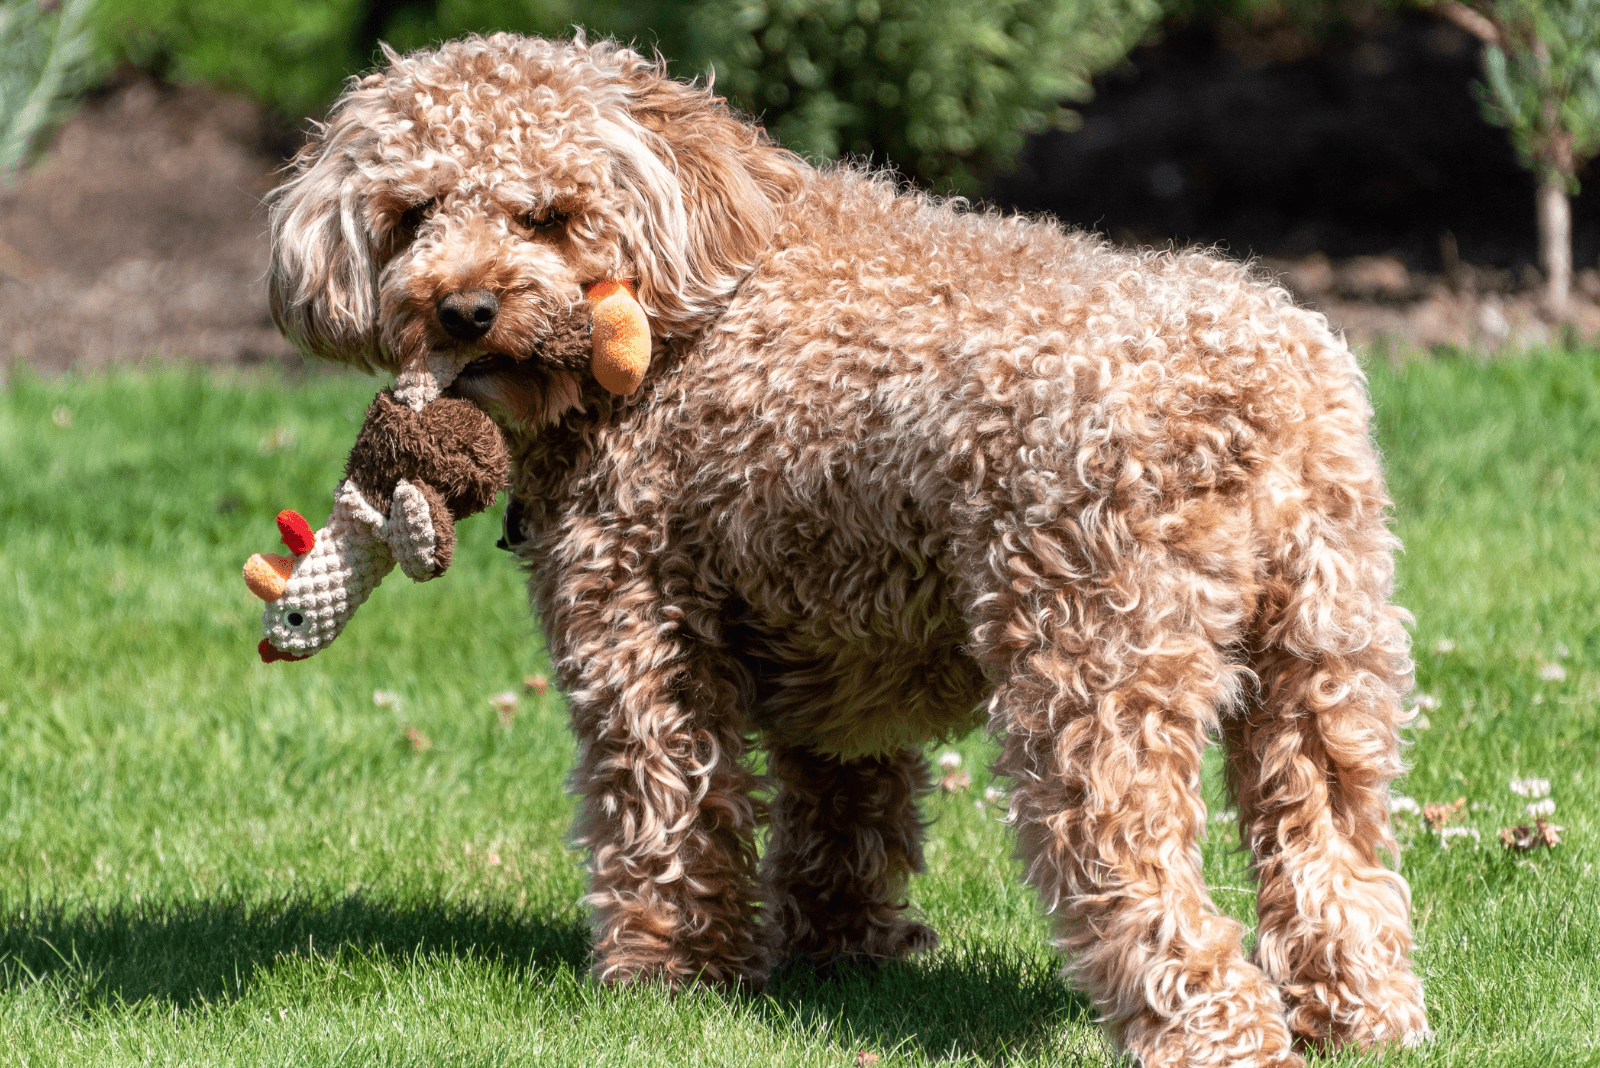 A goldendoodle holds a braided honey in its mouth